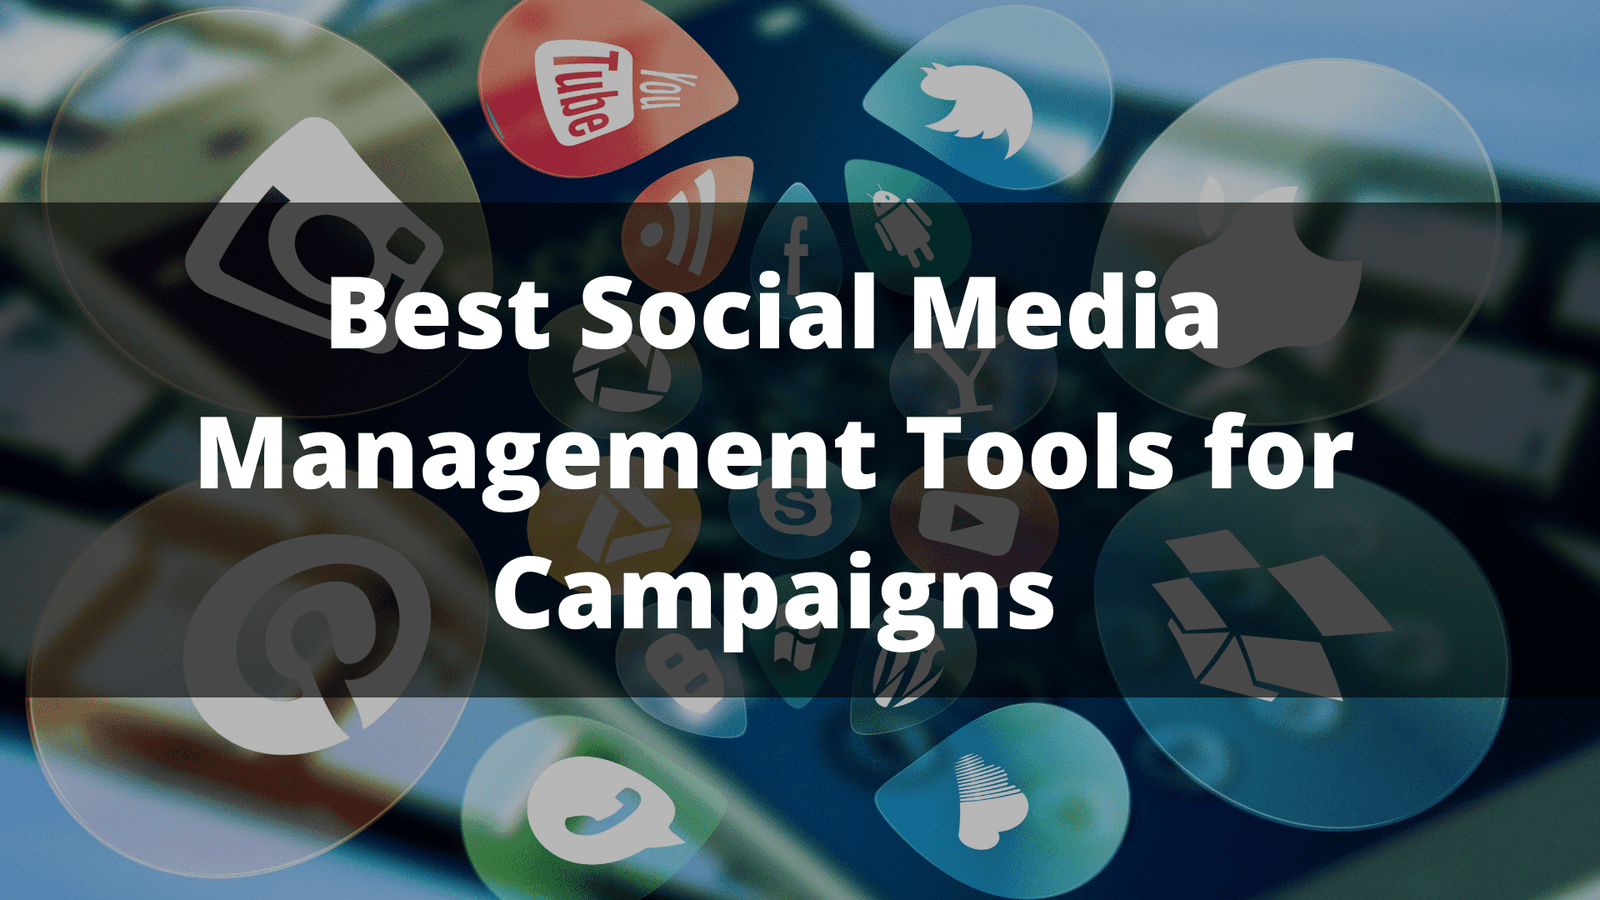 Best Social Media Management Tools for Campaigns